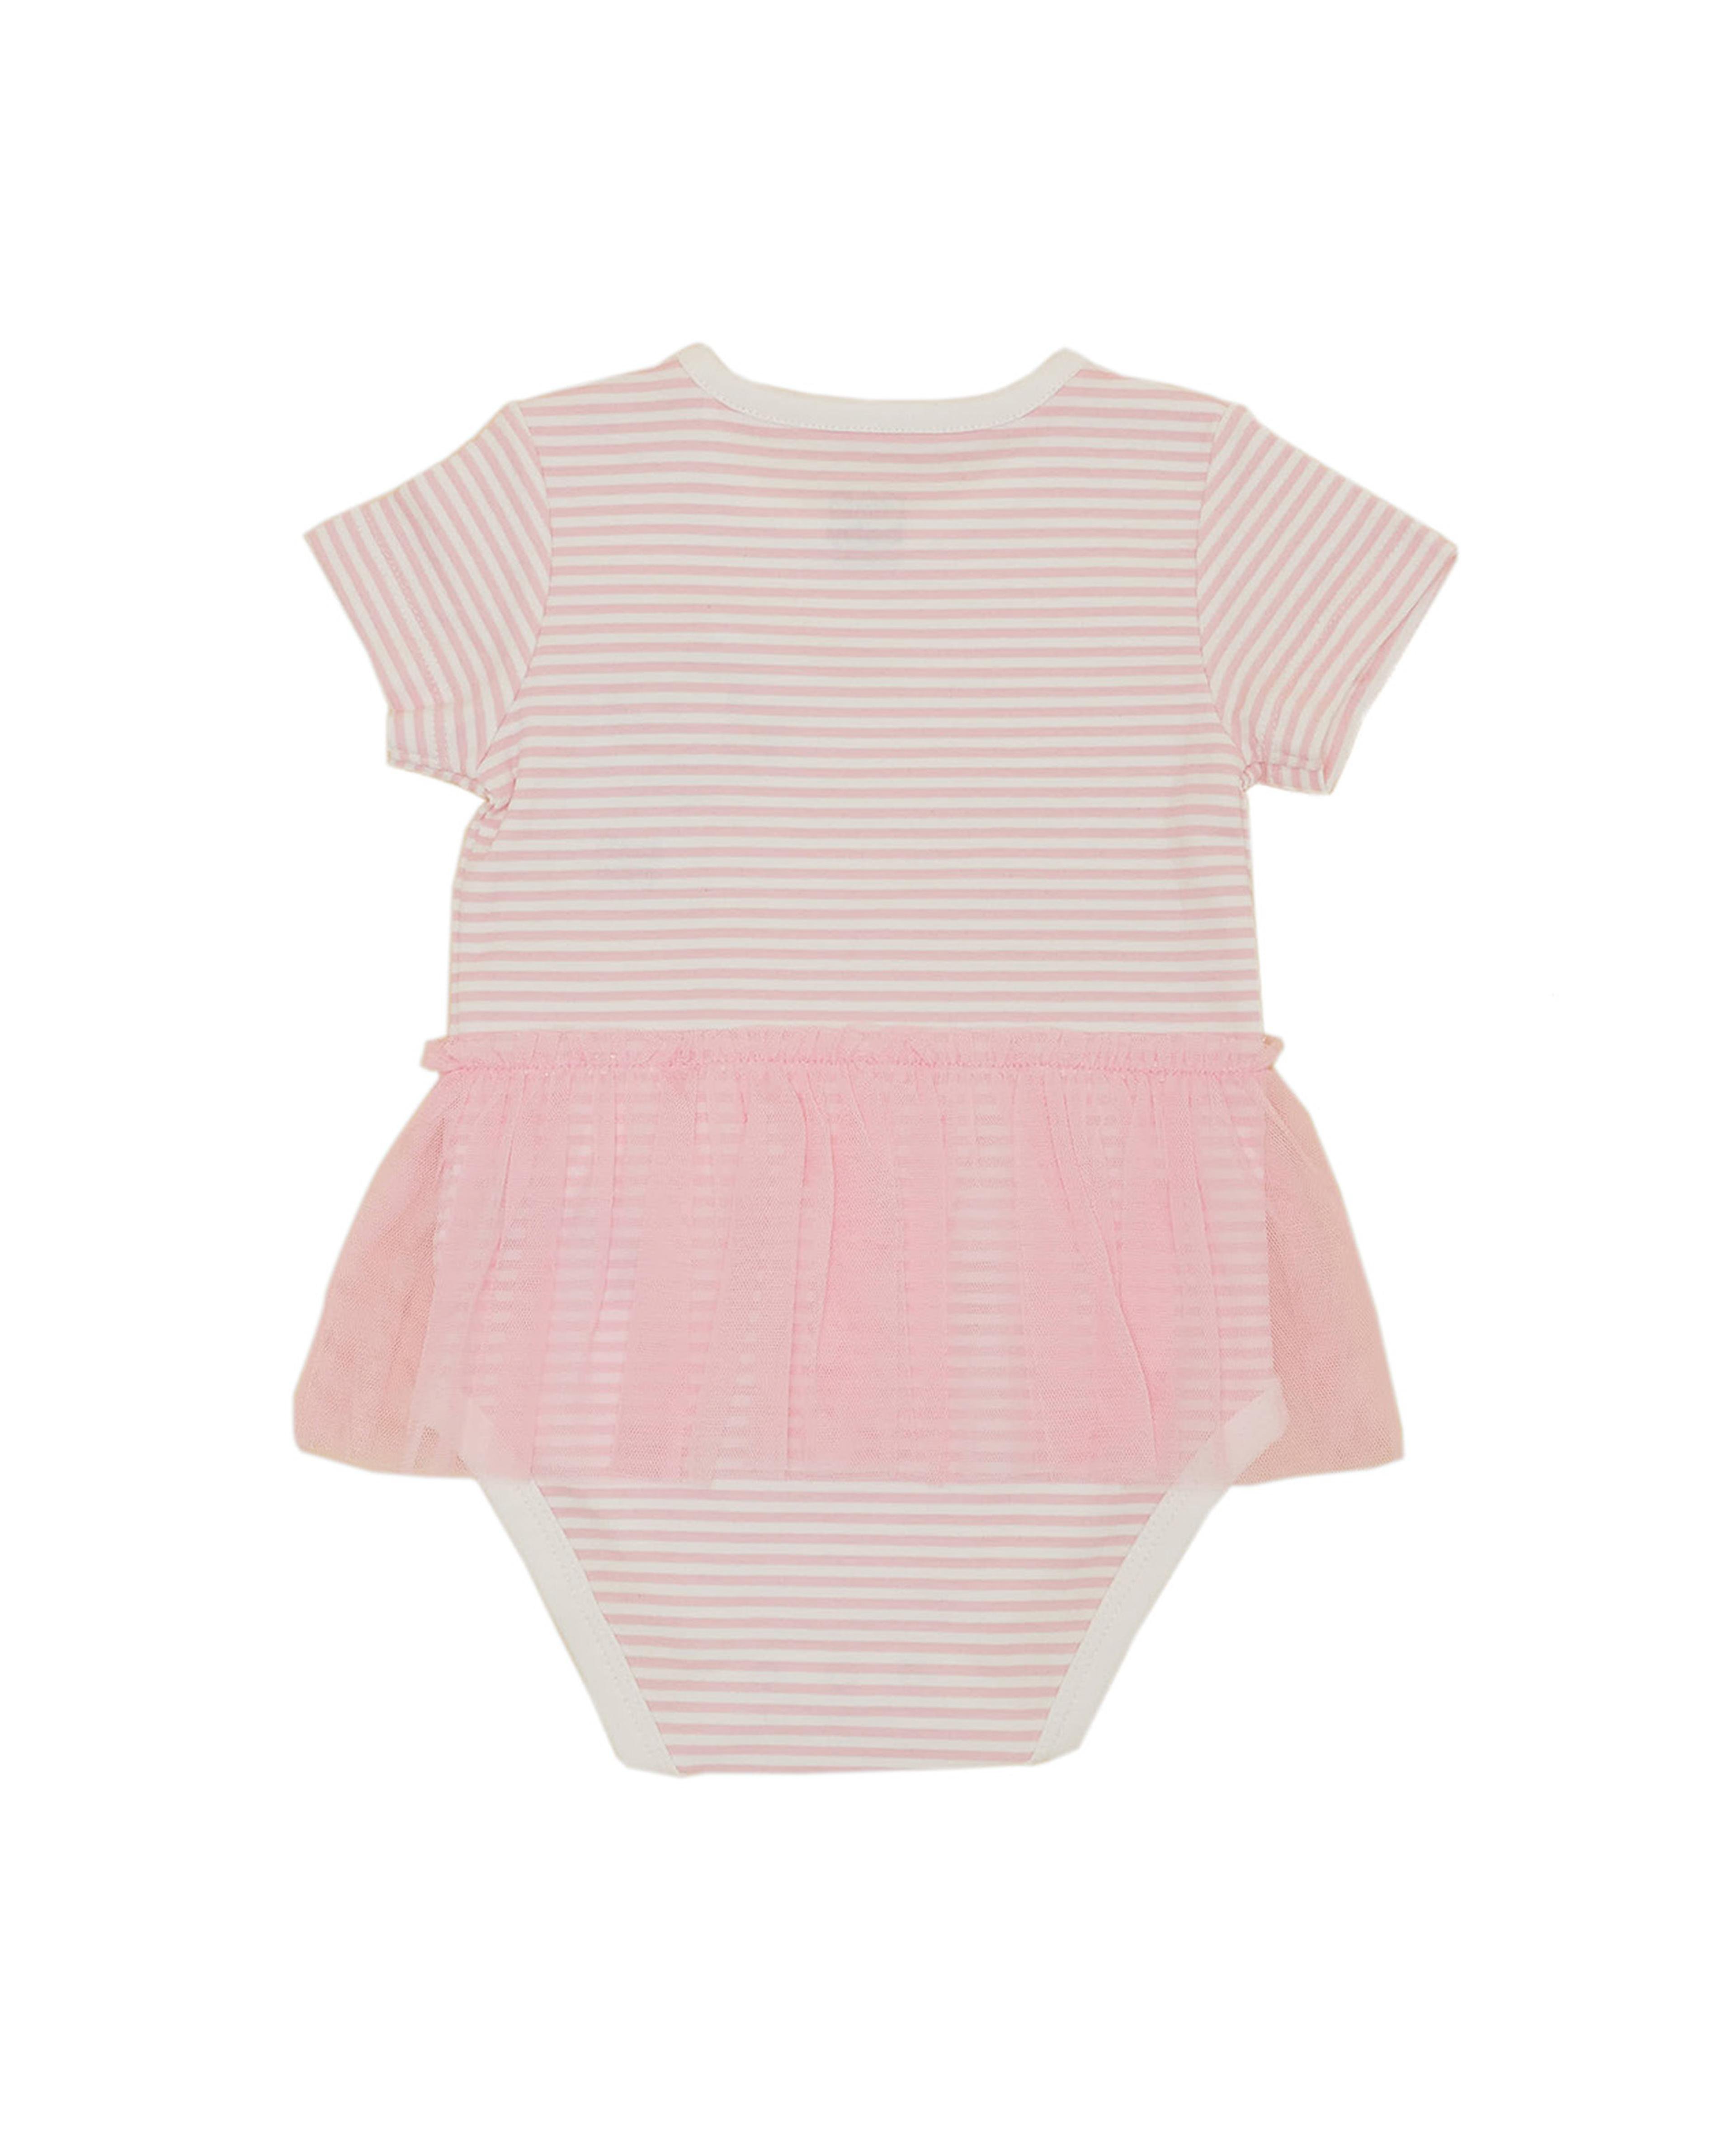 Striped Tulle Bodysuit with Short Sleeves